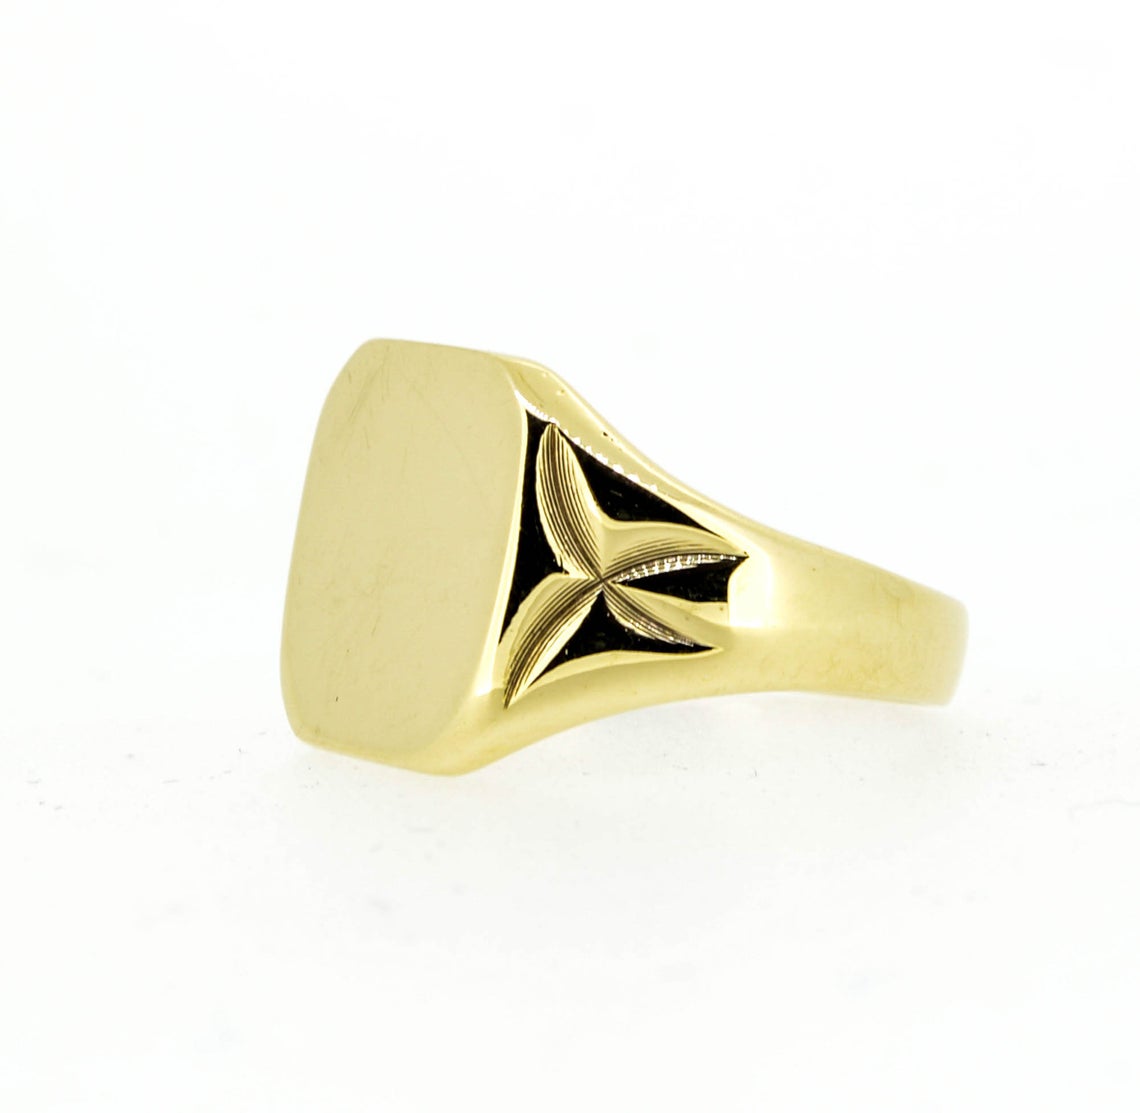 Vintage Gents 9ct Gold Heavy Signet Ring